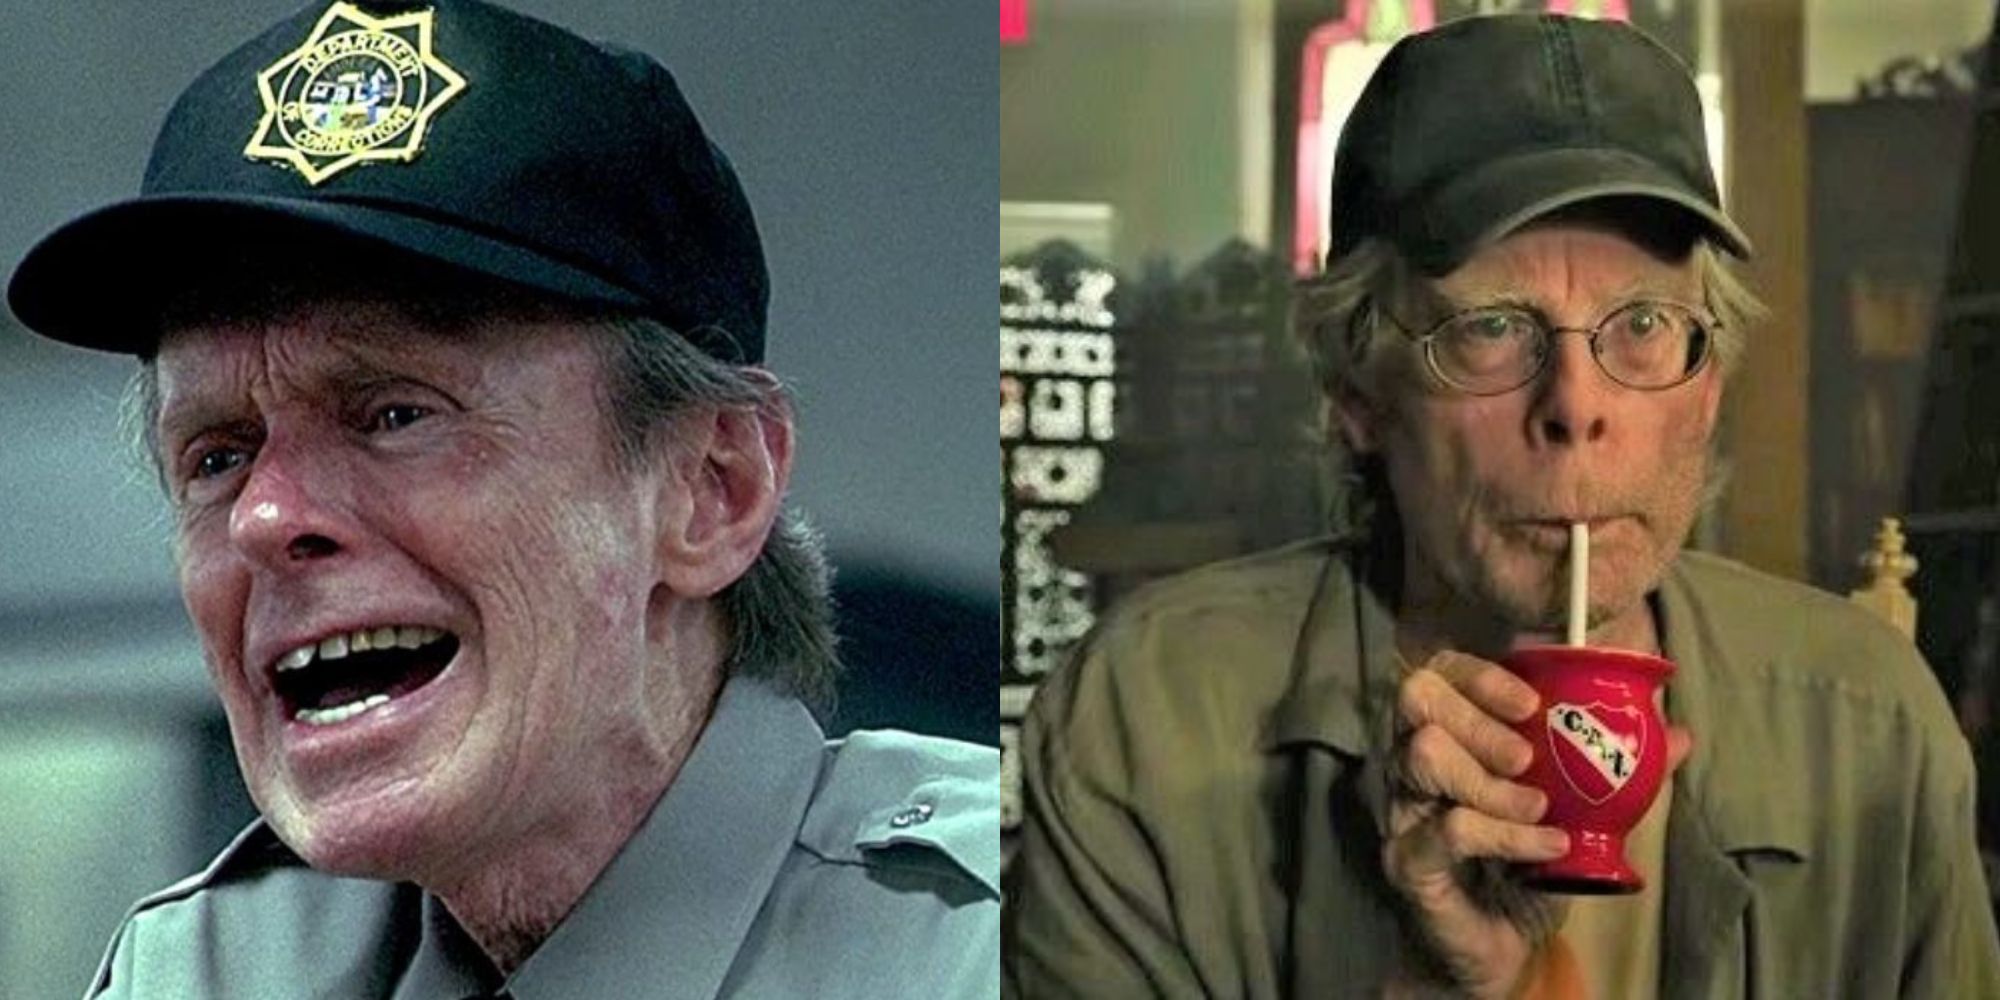 Split image showing Hubert Selby Jr. in Requiem for a Dream and Stephen King in IT Chapter 2.